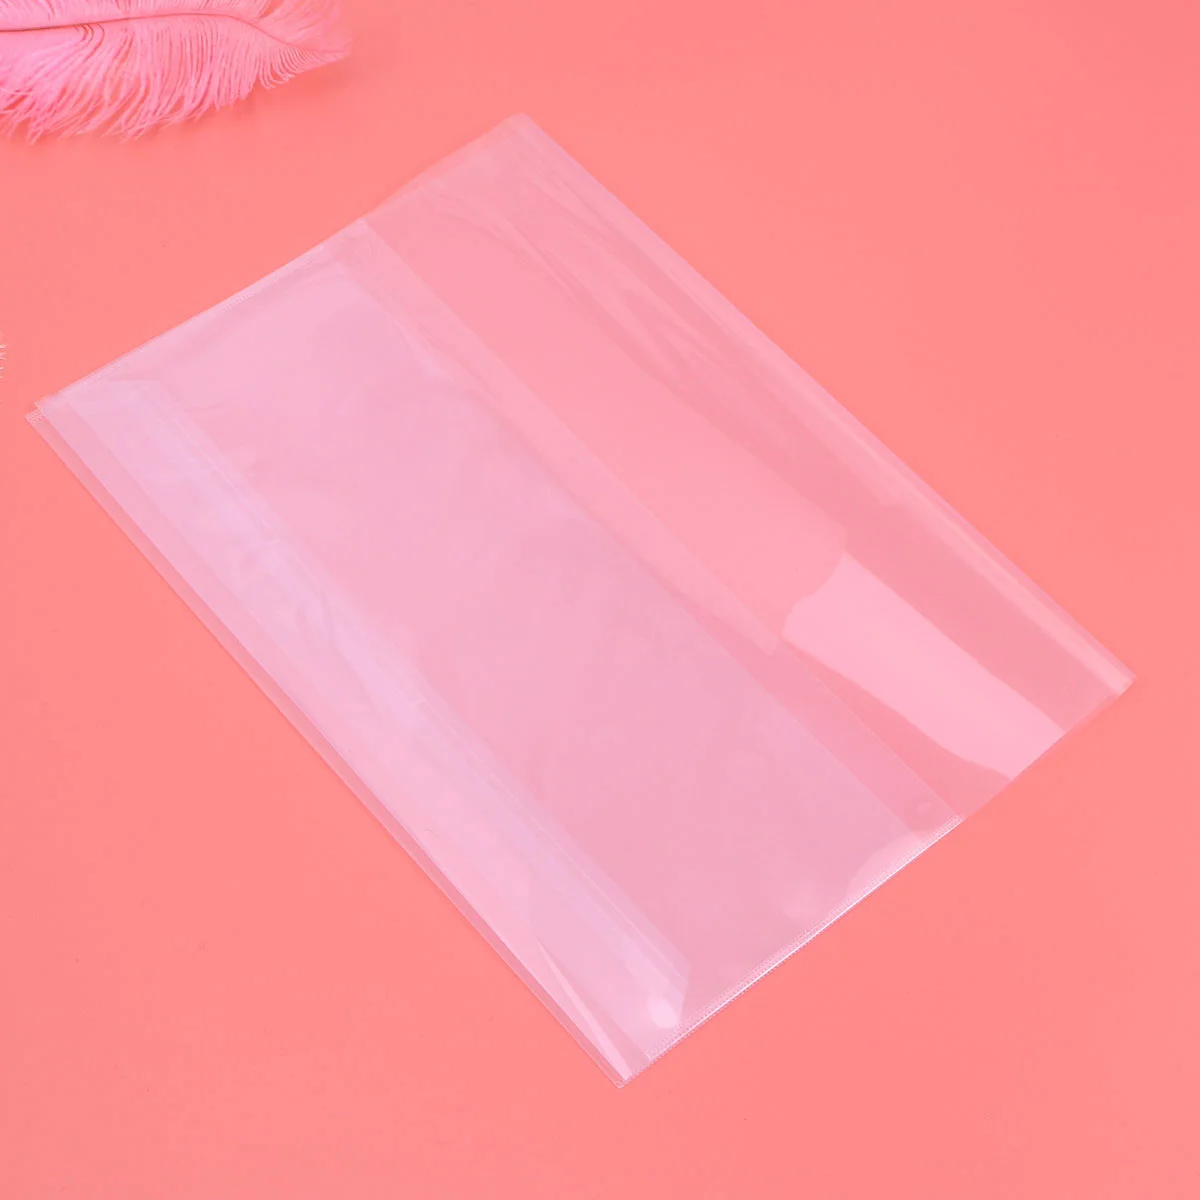 

16K Waterproof Clear Textbook Cover, 5, 38 X 27 X 0 2cm, Note Book Protector, Book Safe, Magazine Protectors for Collectors,